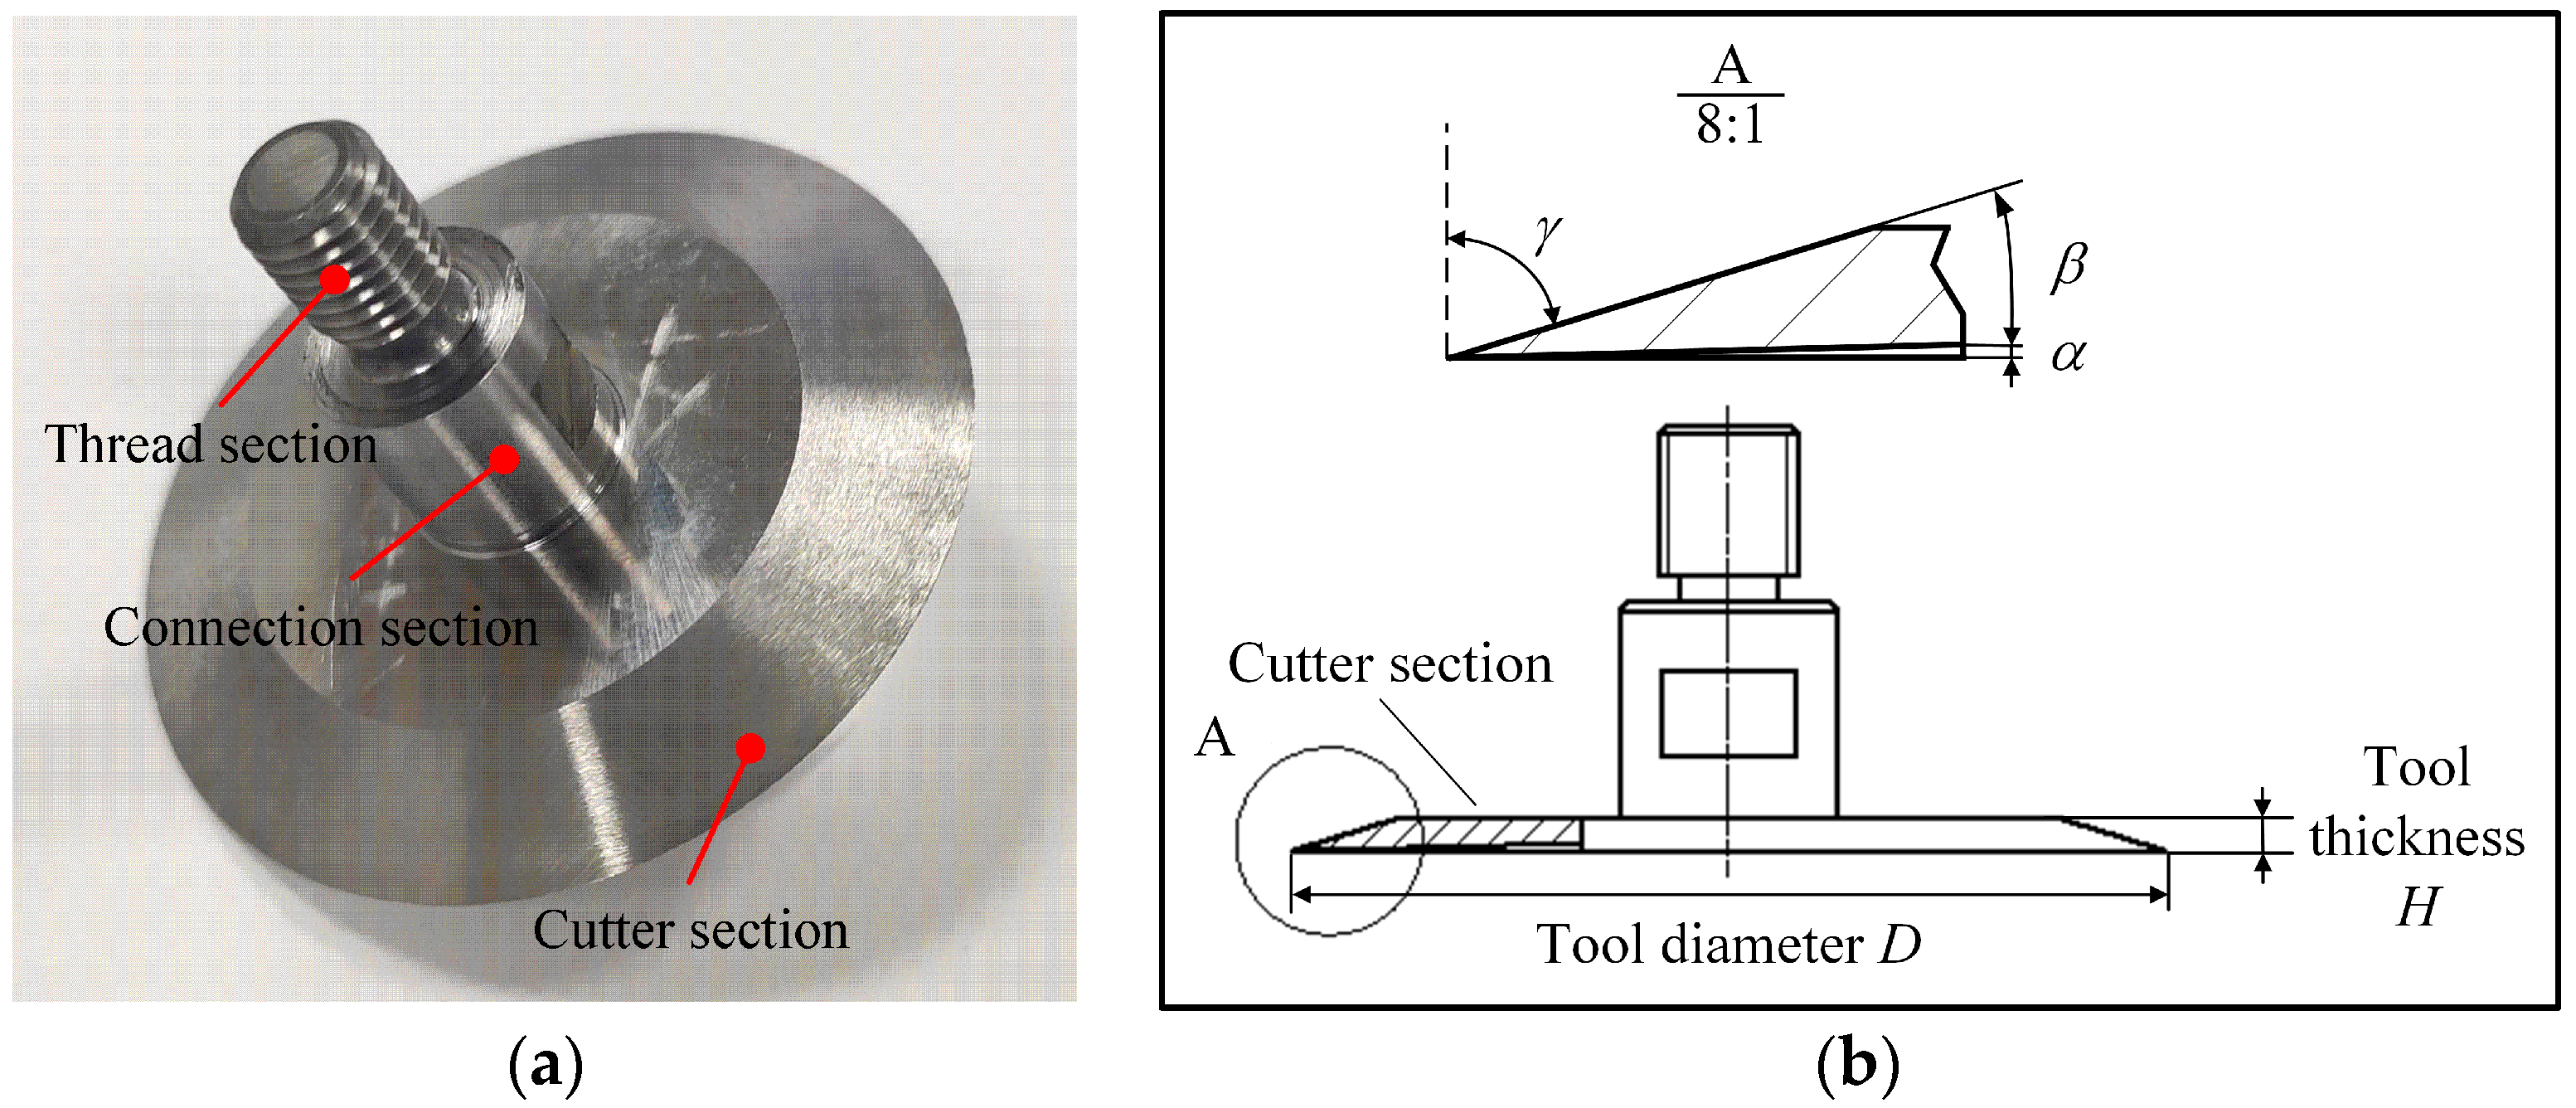 The position of the straight edge cutter relative to the absorbing